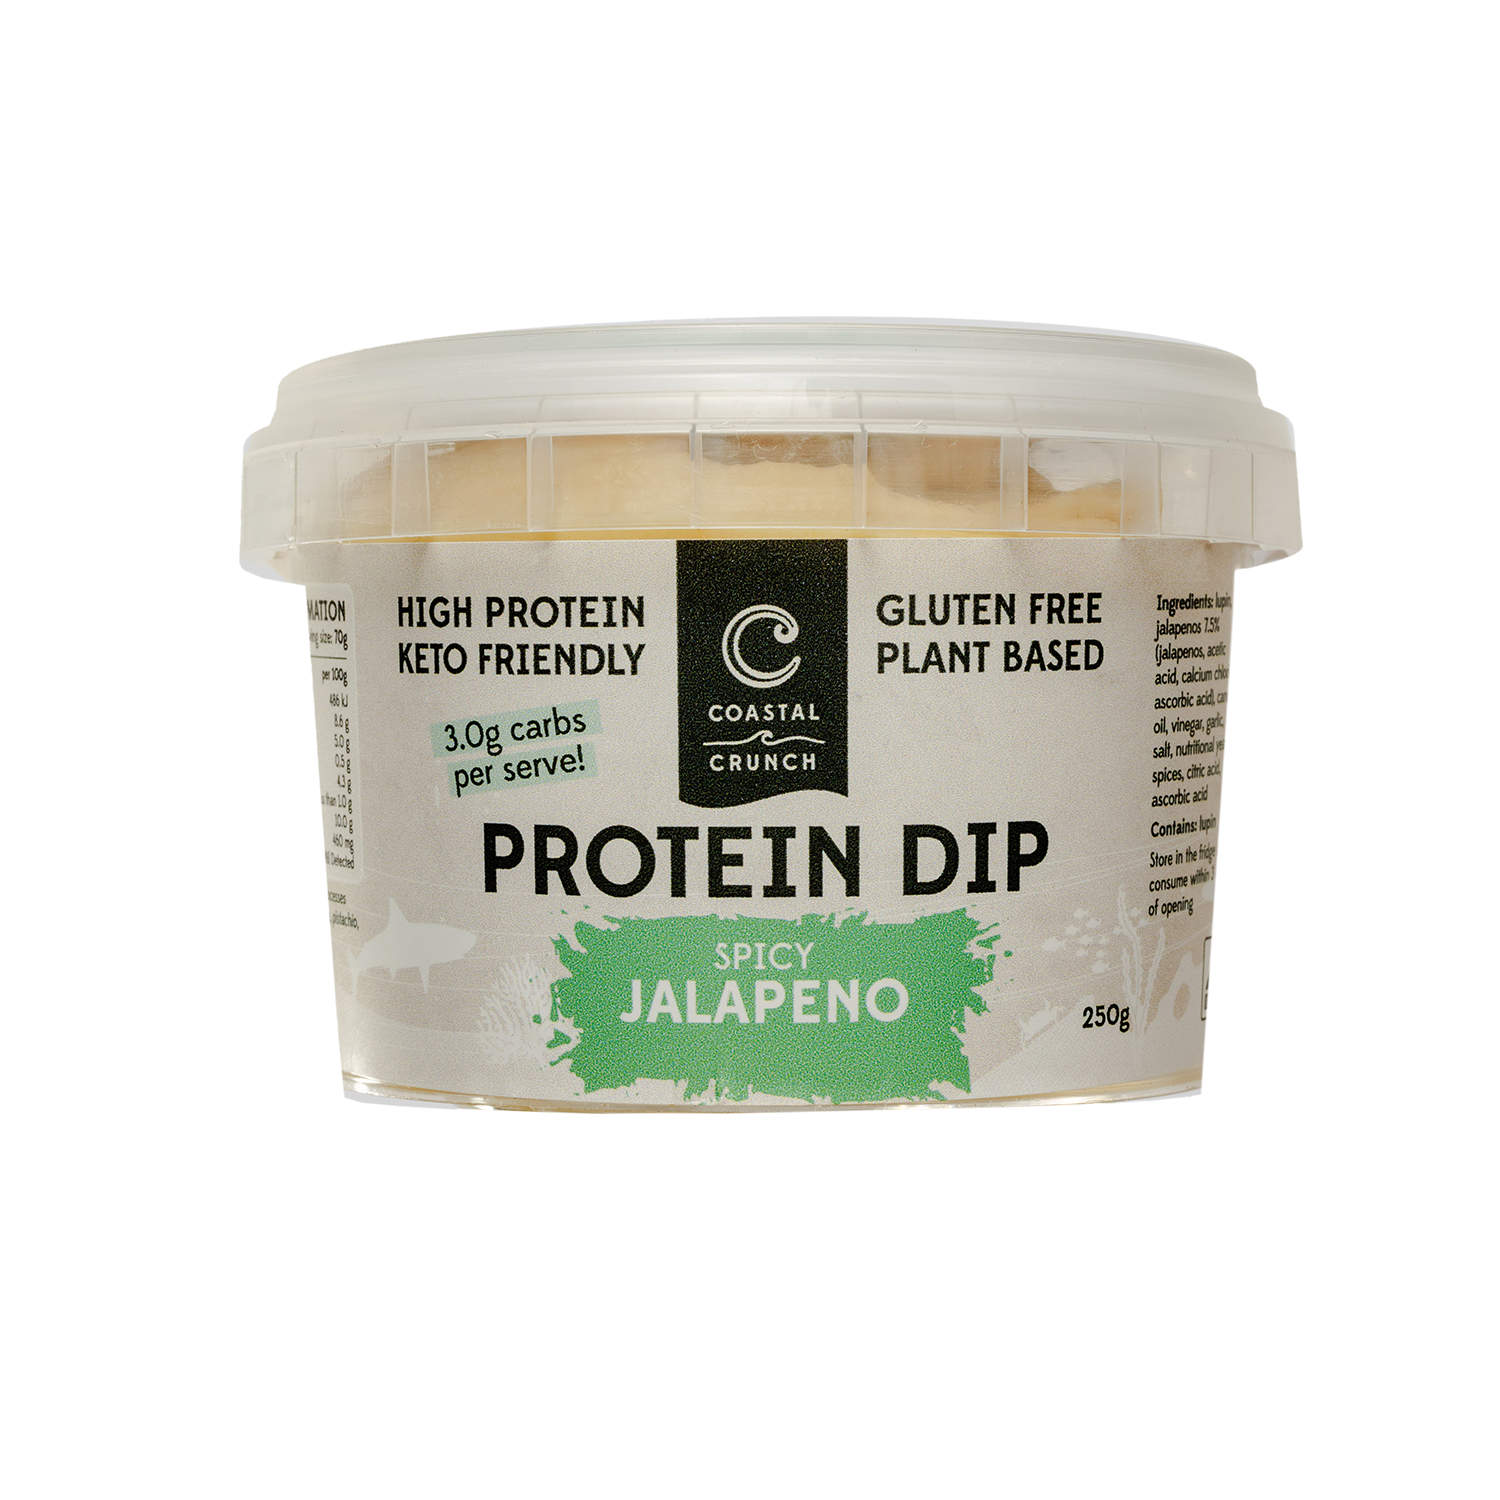 Spicy Jalapeno Protein Dip